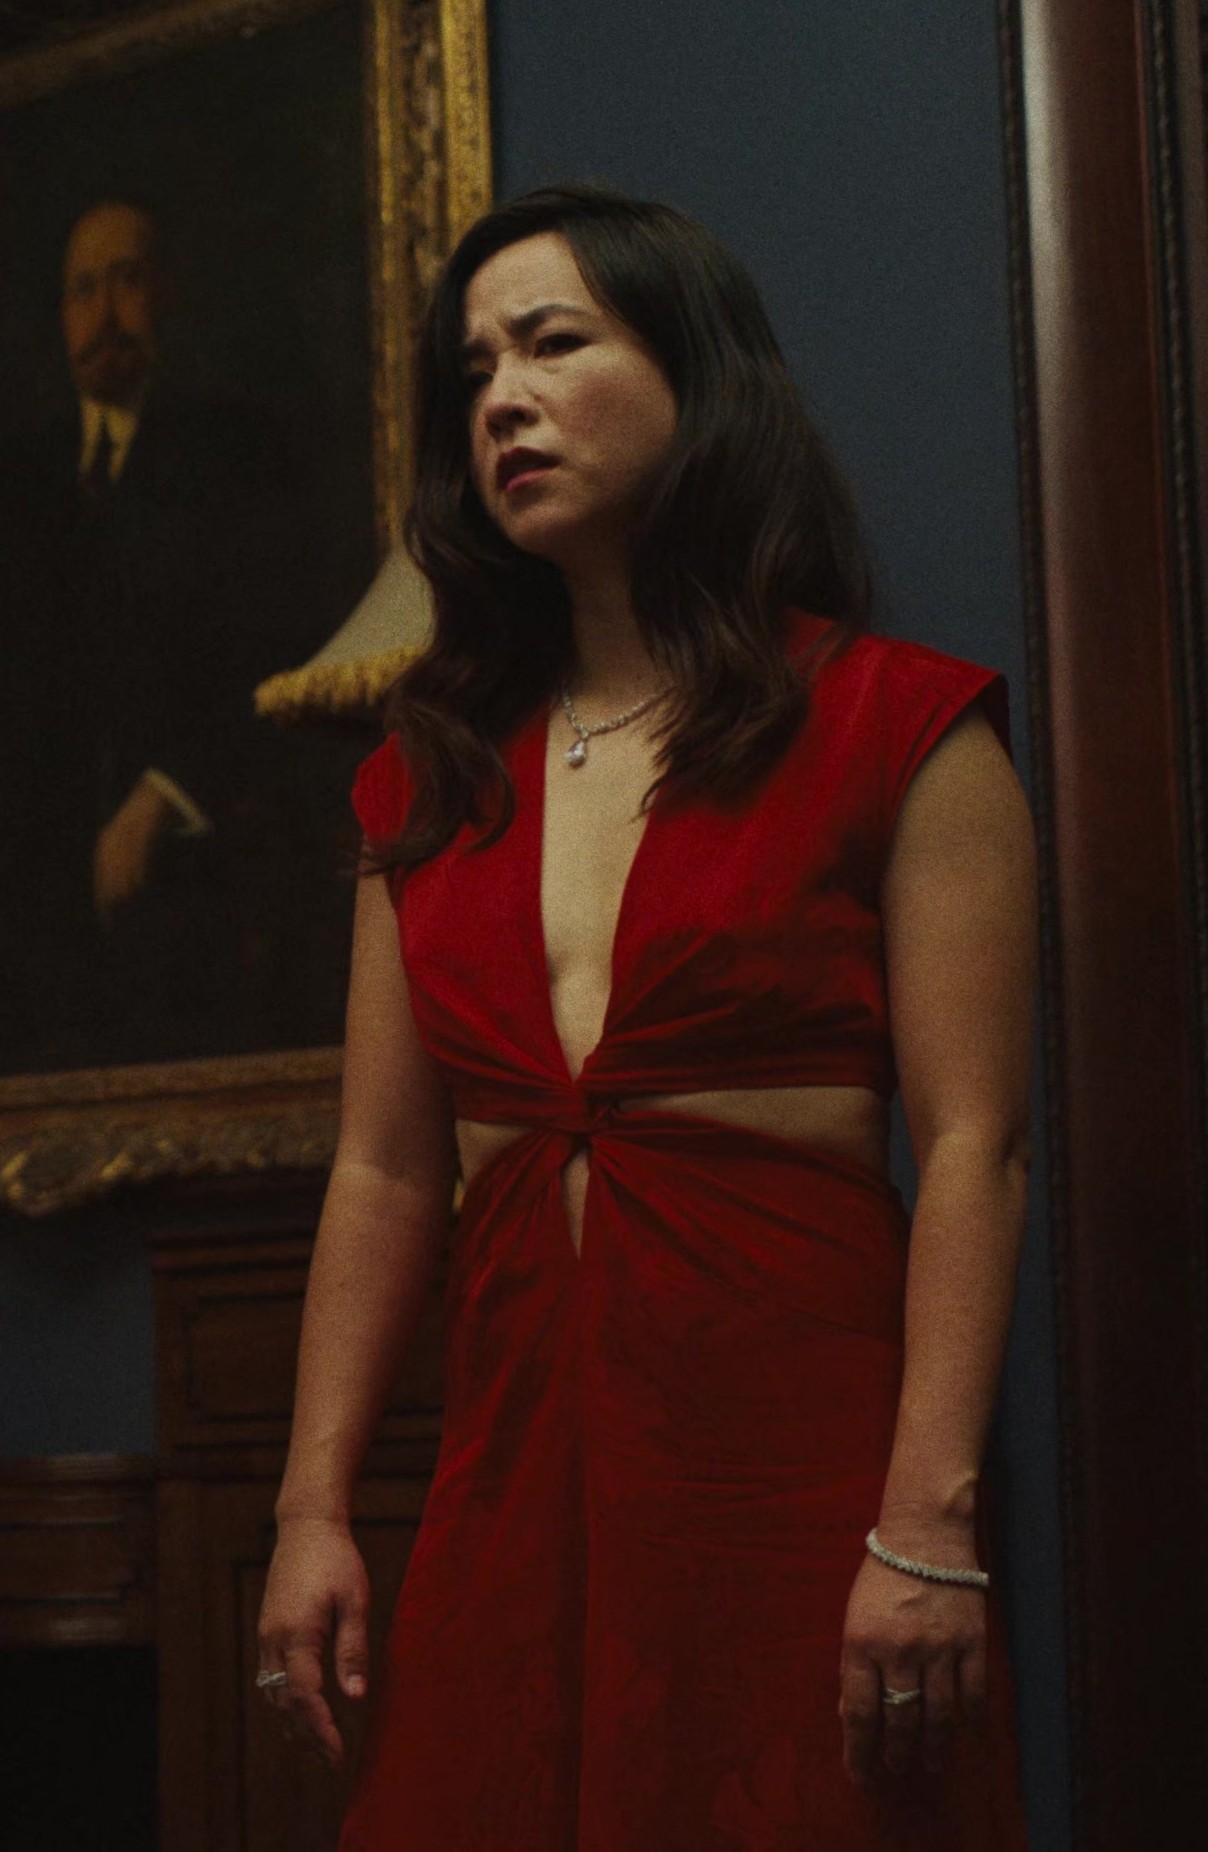 Worn on Mr. & Mrs. Smith TV Show - Deep V-Neck and Knot Front Detail Red Evening Dress Worn by Maya Erskine as Jane Smith